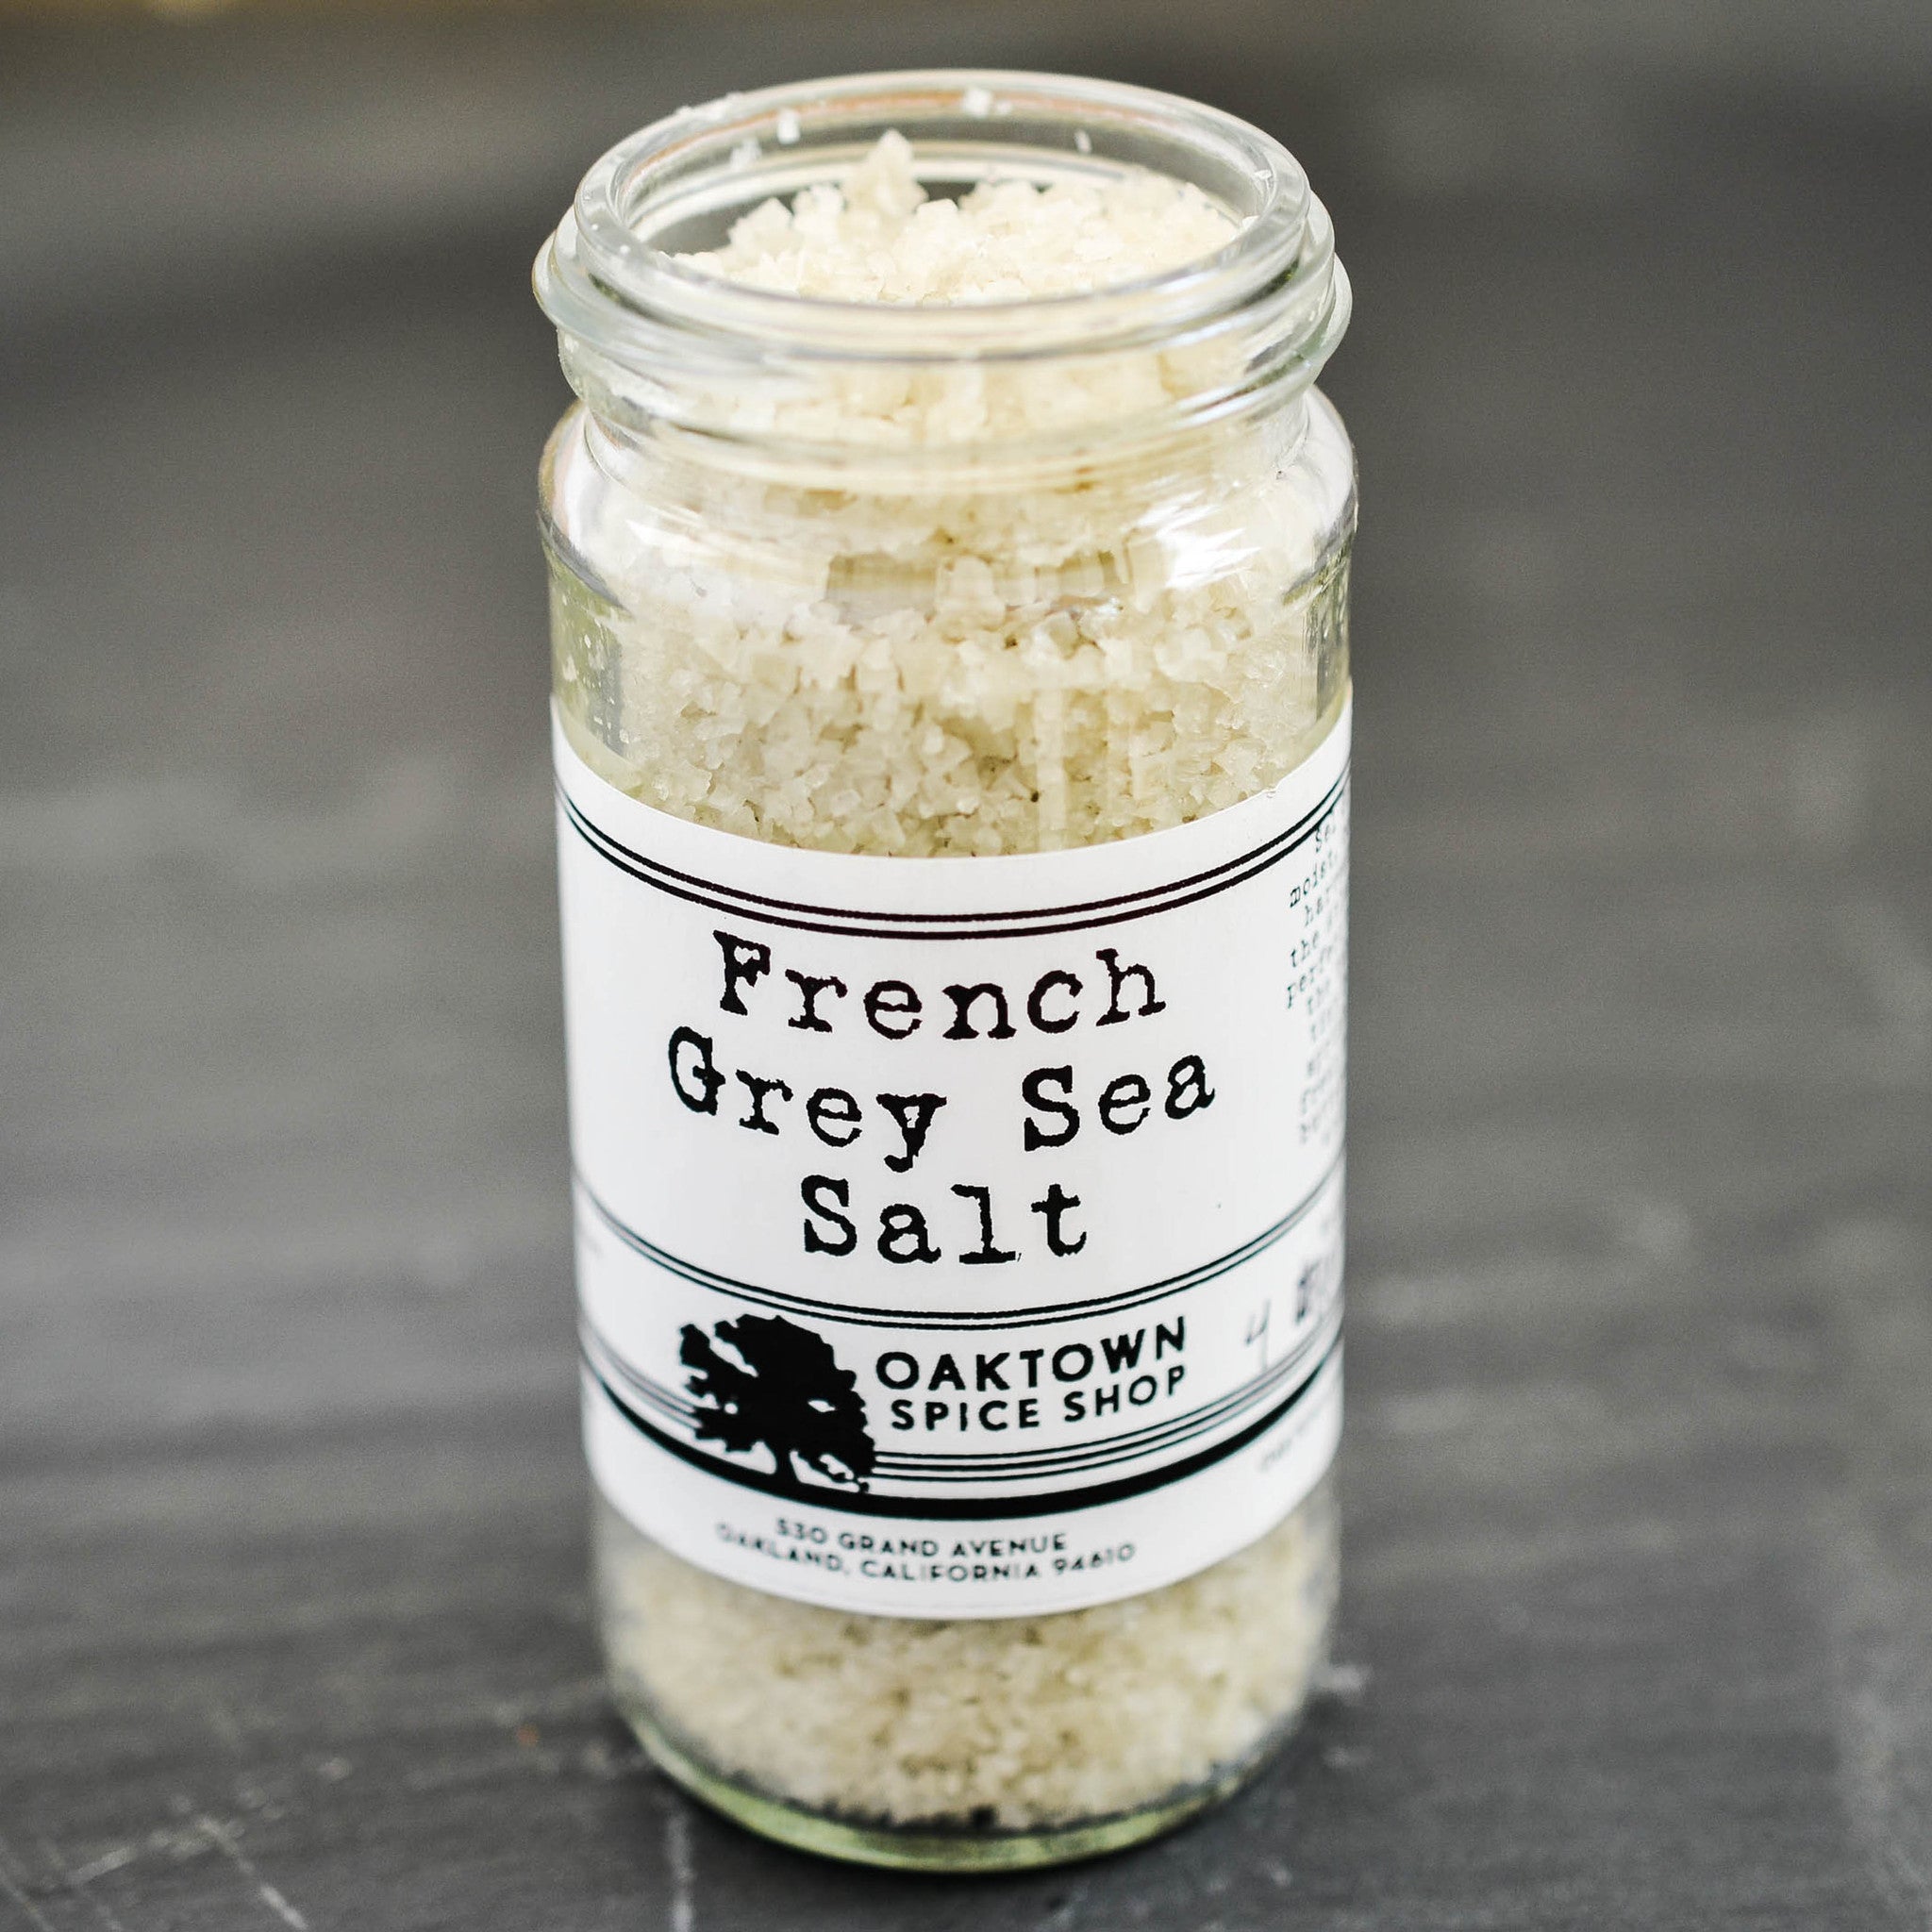 French Grey Sea Salt (Sel Gris) by Oaktowns Spice Shop is a moist, coarse salt harvested from the Atlantic